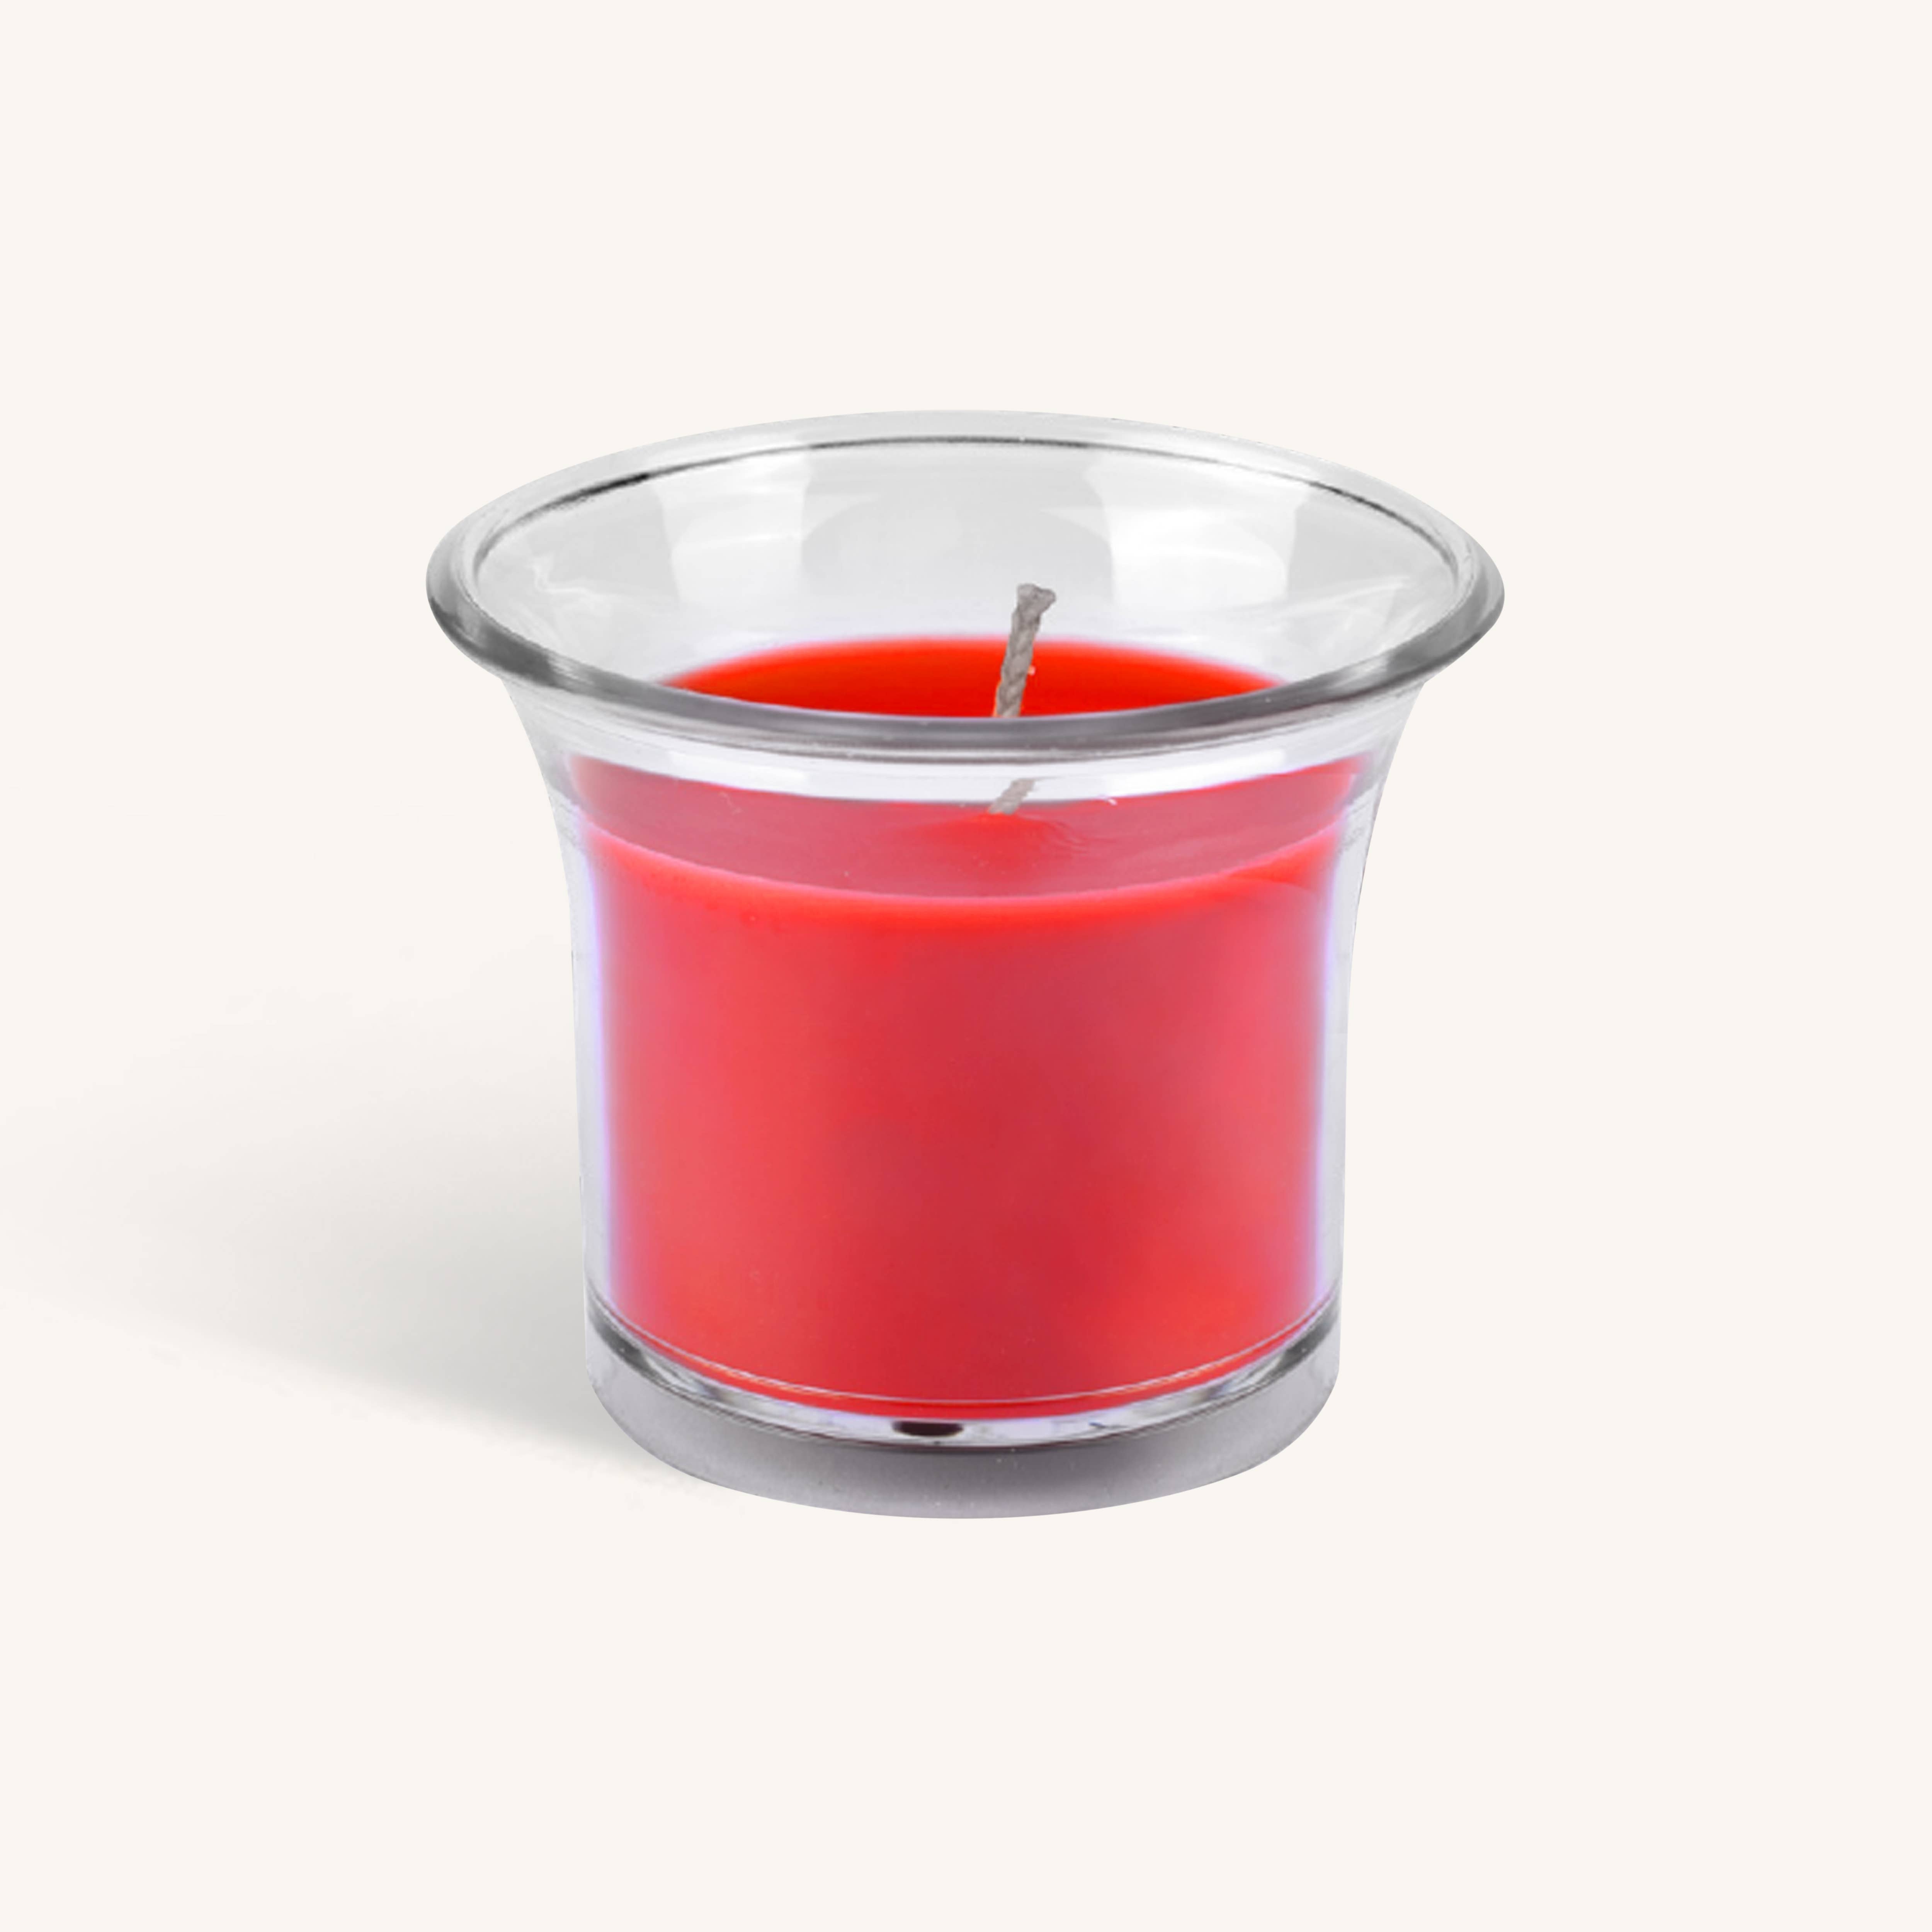 Scented Candles In Plastic Cups -Apple Cinnamon- 12Hr - 4Pk